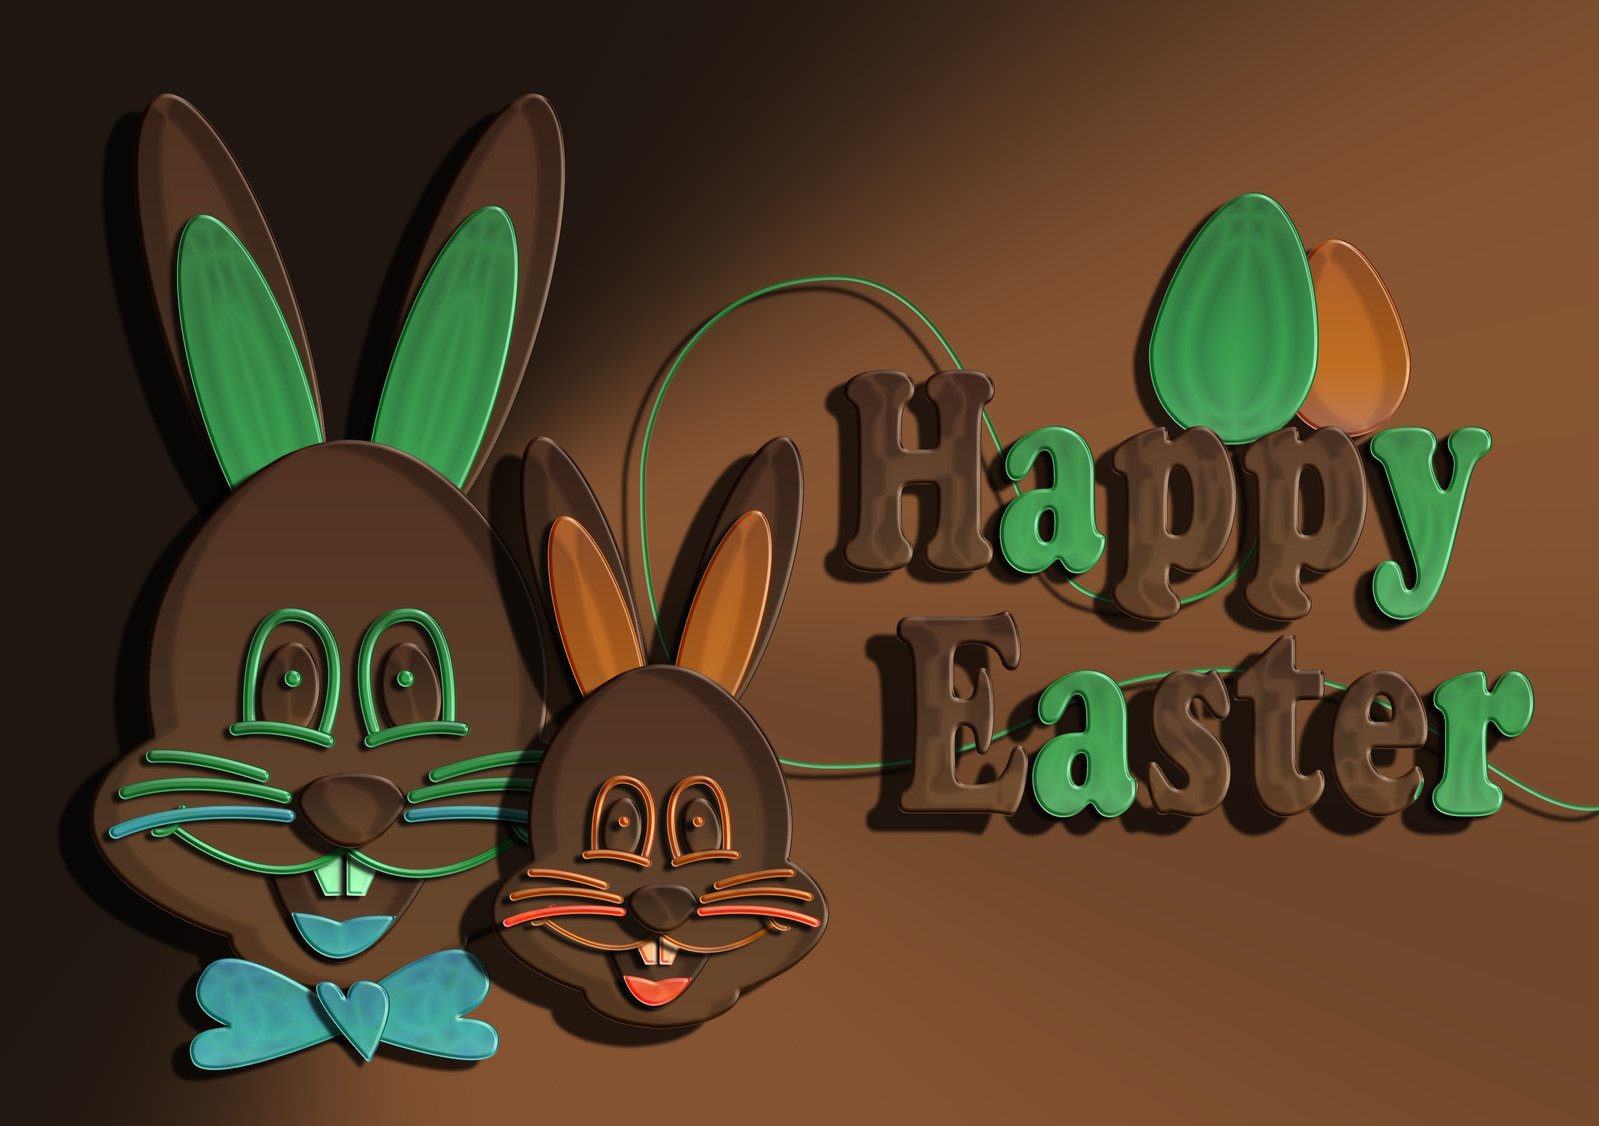 happy easter wallpaper with an image of two rabbits